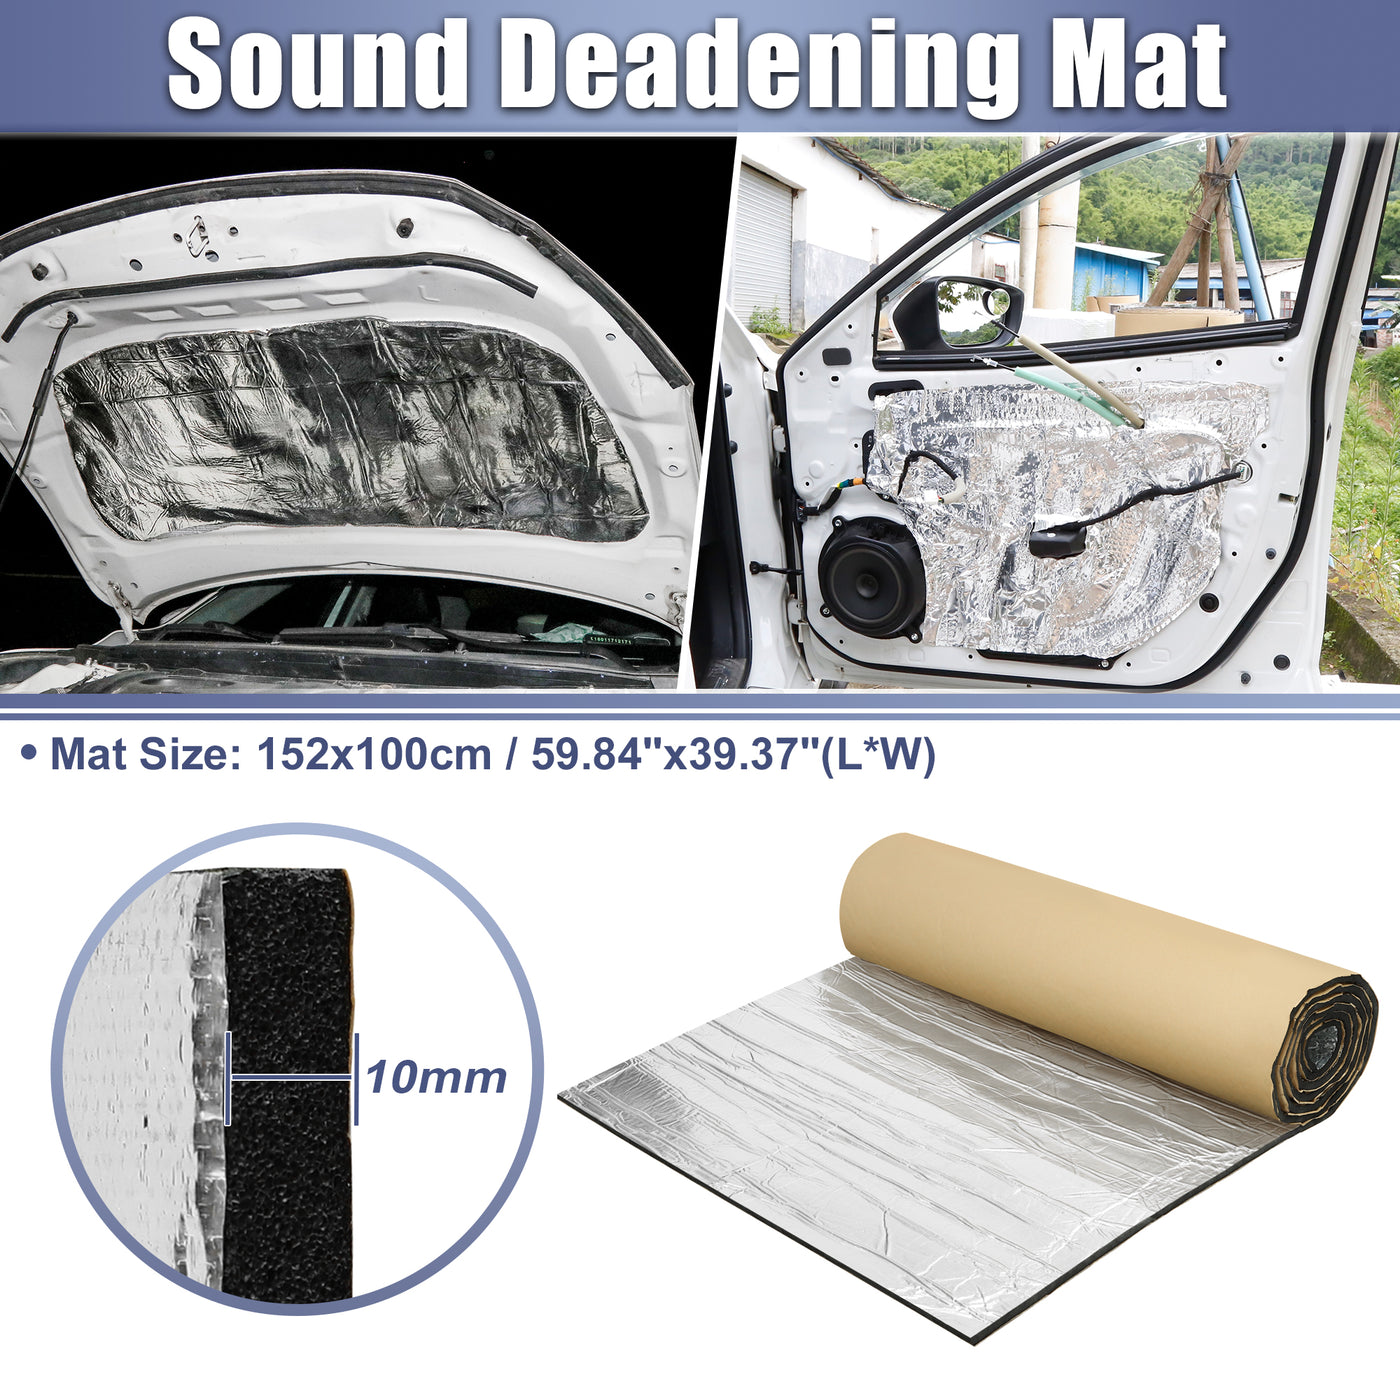 X AUTOHAUX 394mil 10mm 16.36sqft Car Sound Deadening Mat Glassfiber Closed Cell Foam Heat Shield Material Damping Self Adhesive Universal for Hood Fender and Boat Engine Cover 59.84"x39.37"